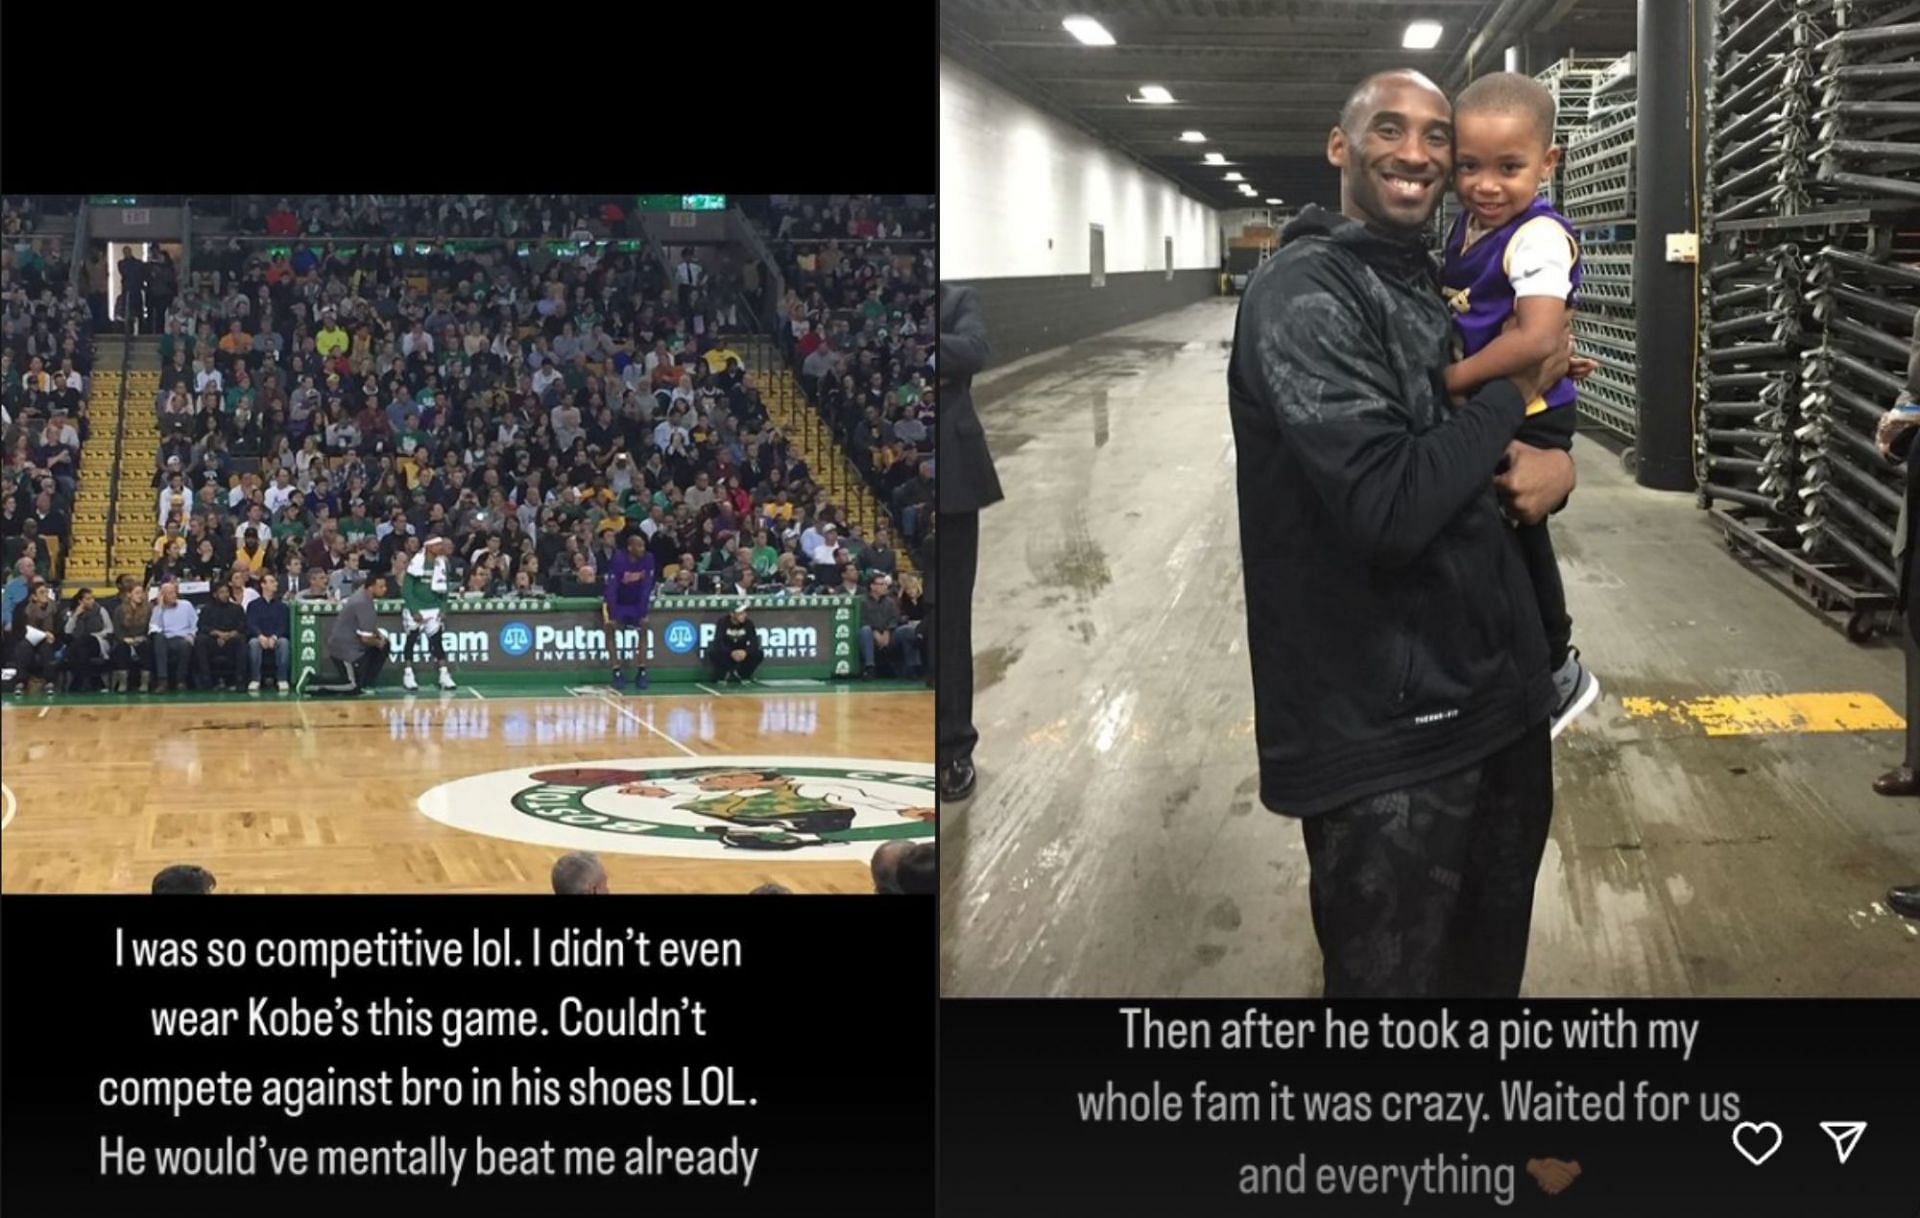 Isaiah Thomas shared his memories on social media going up against Kobe Bryant on his final game in Boston